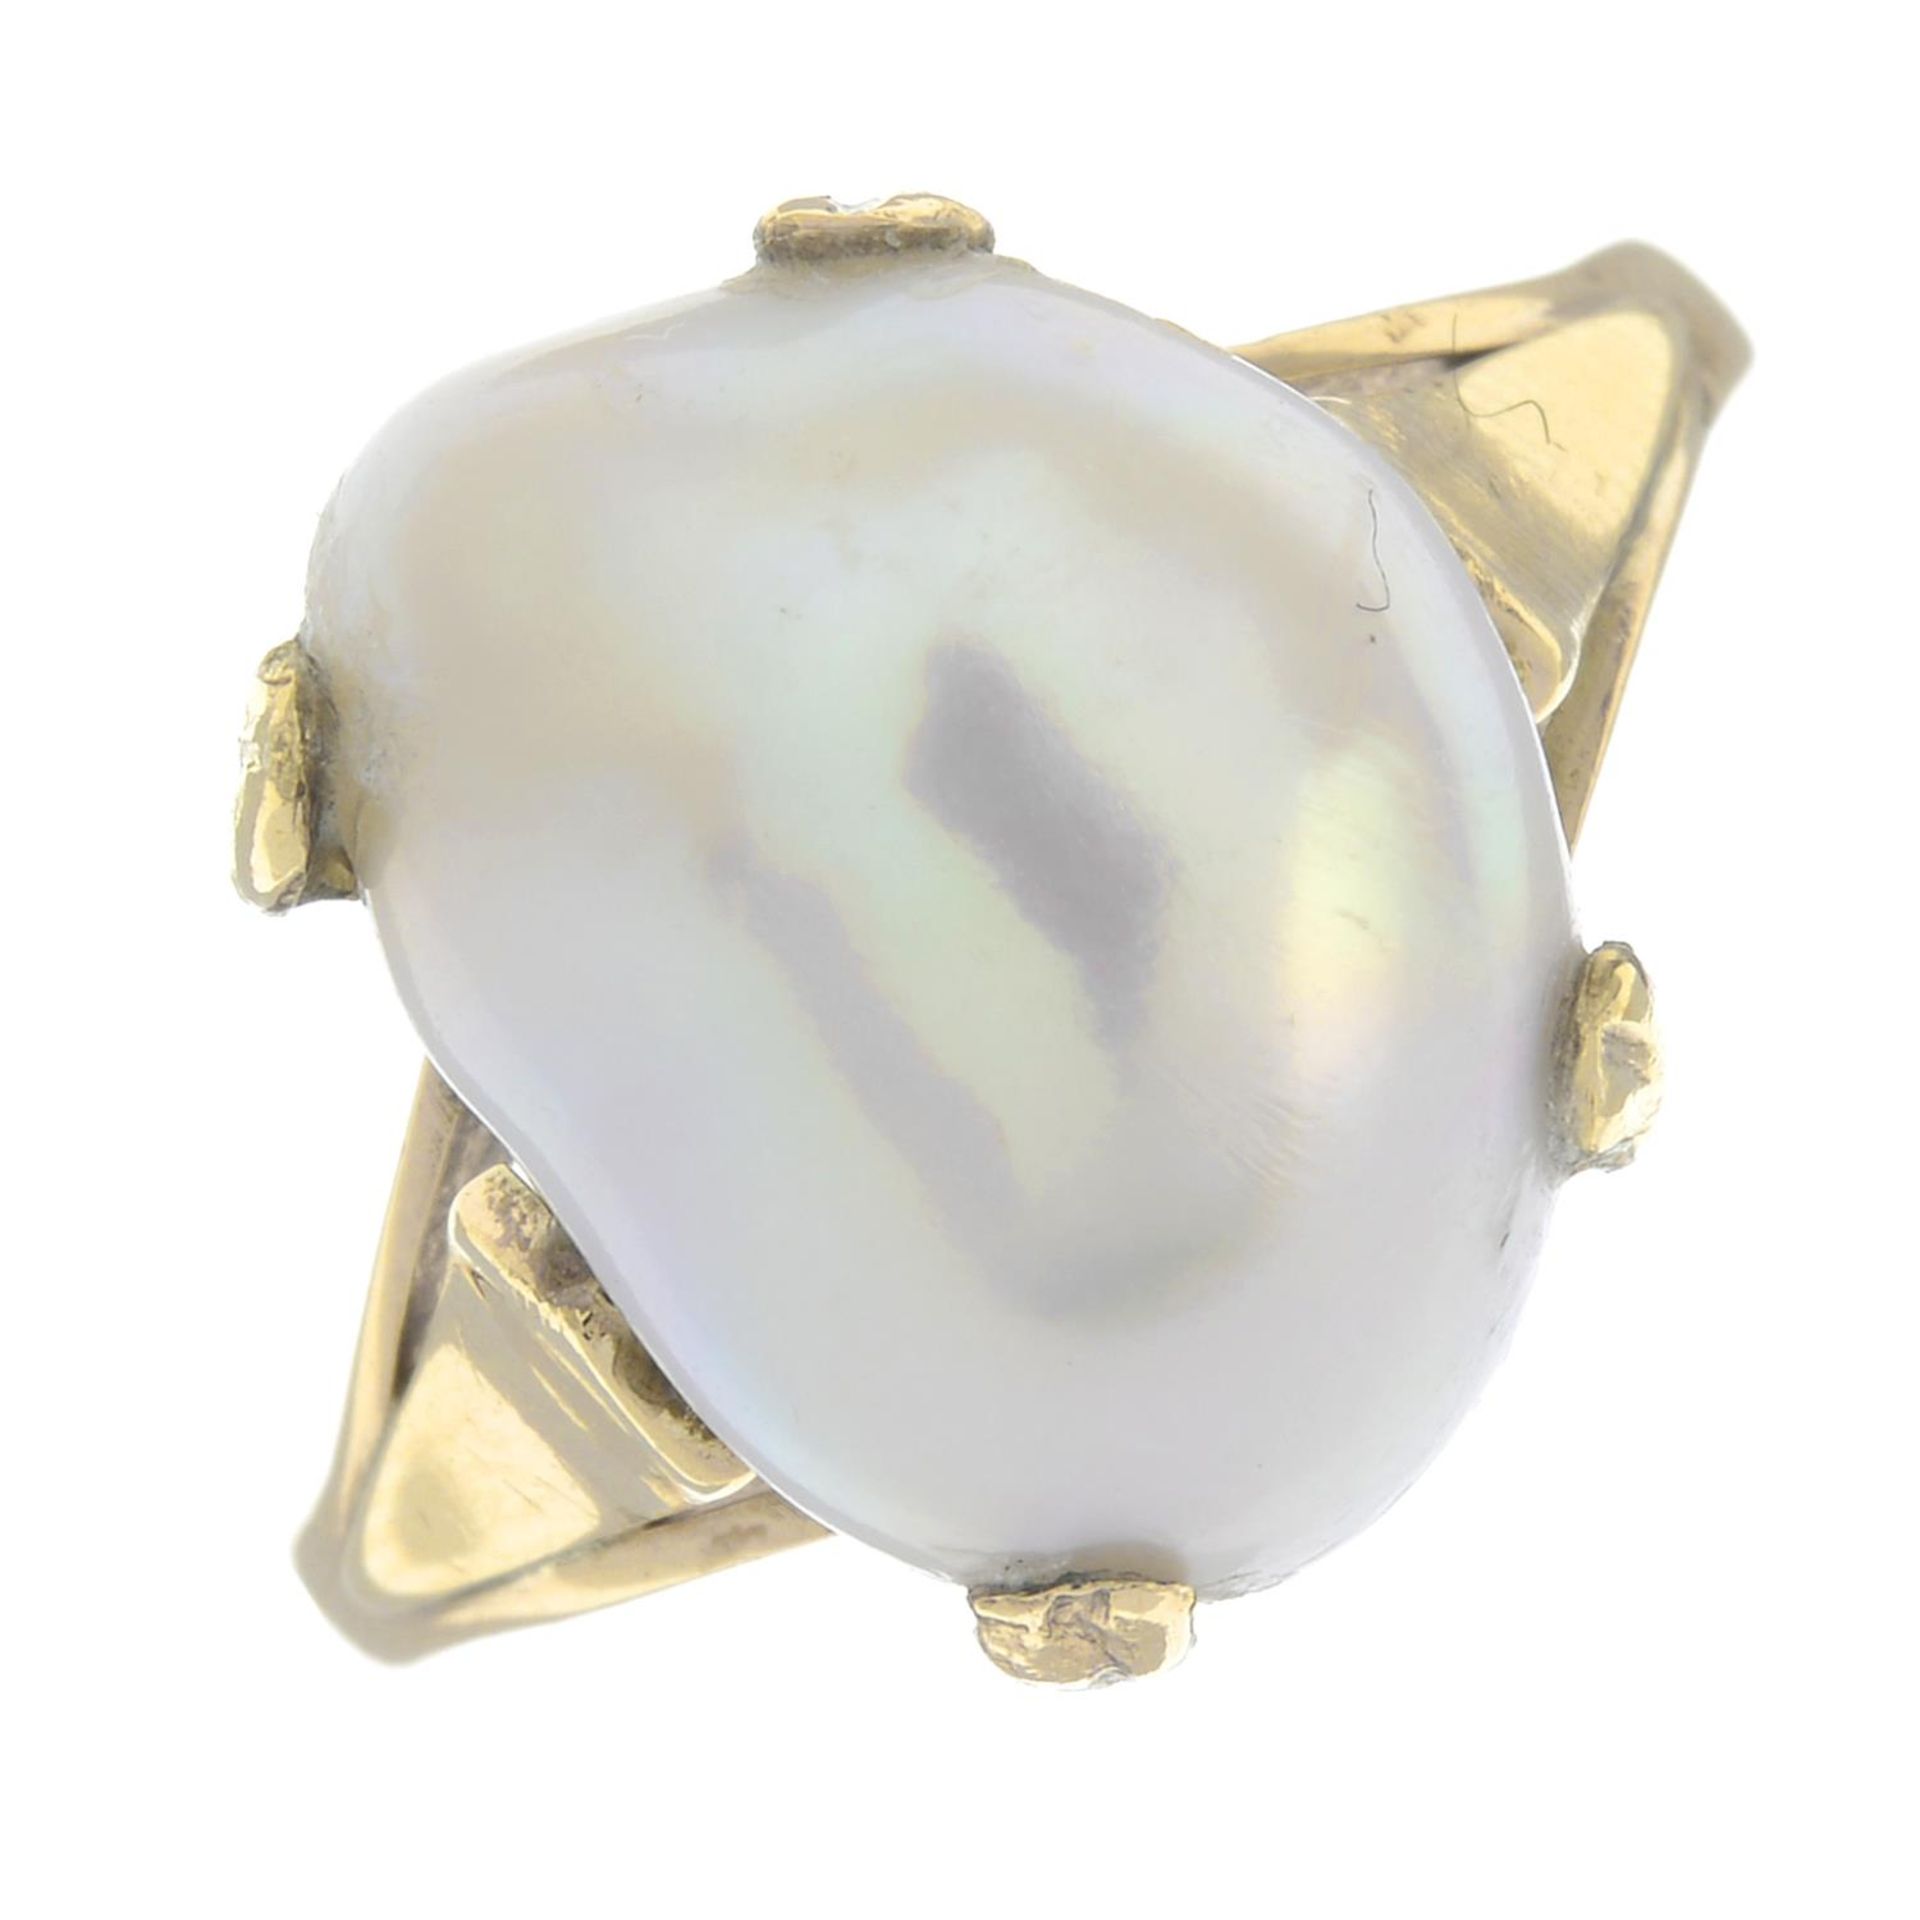 A 9ct gold cultured pearl dress ring.